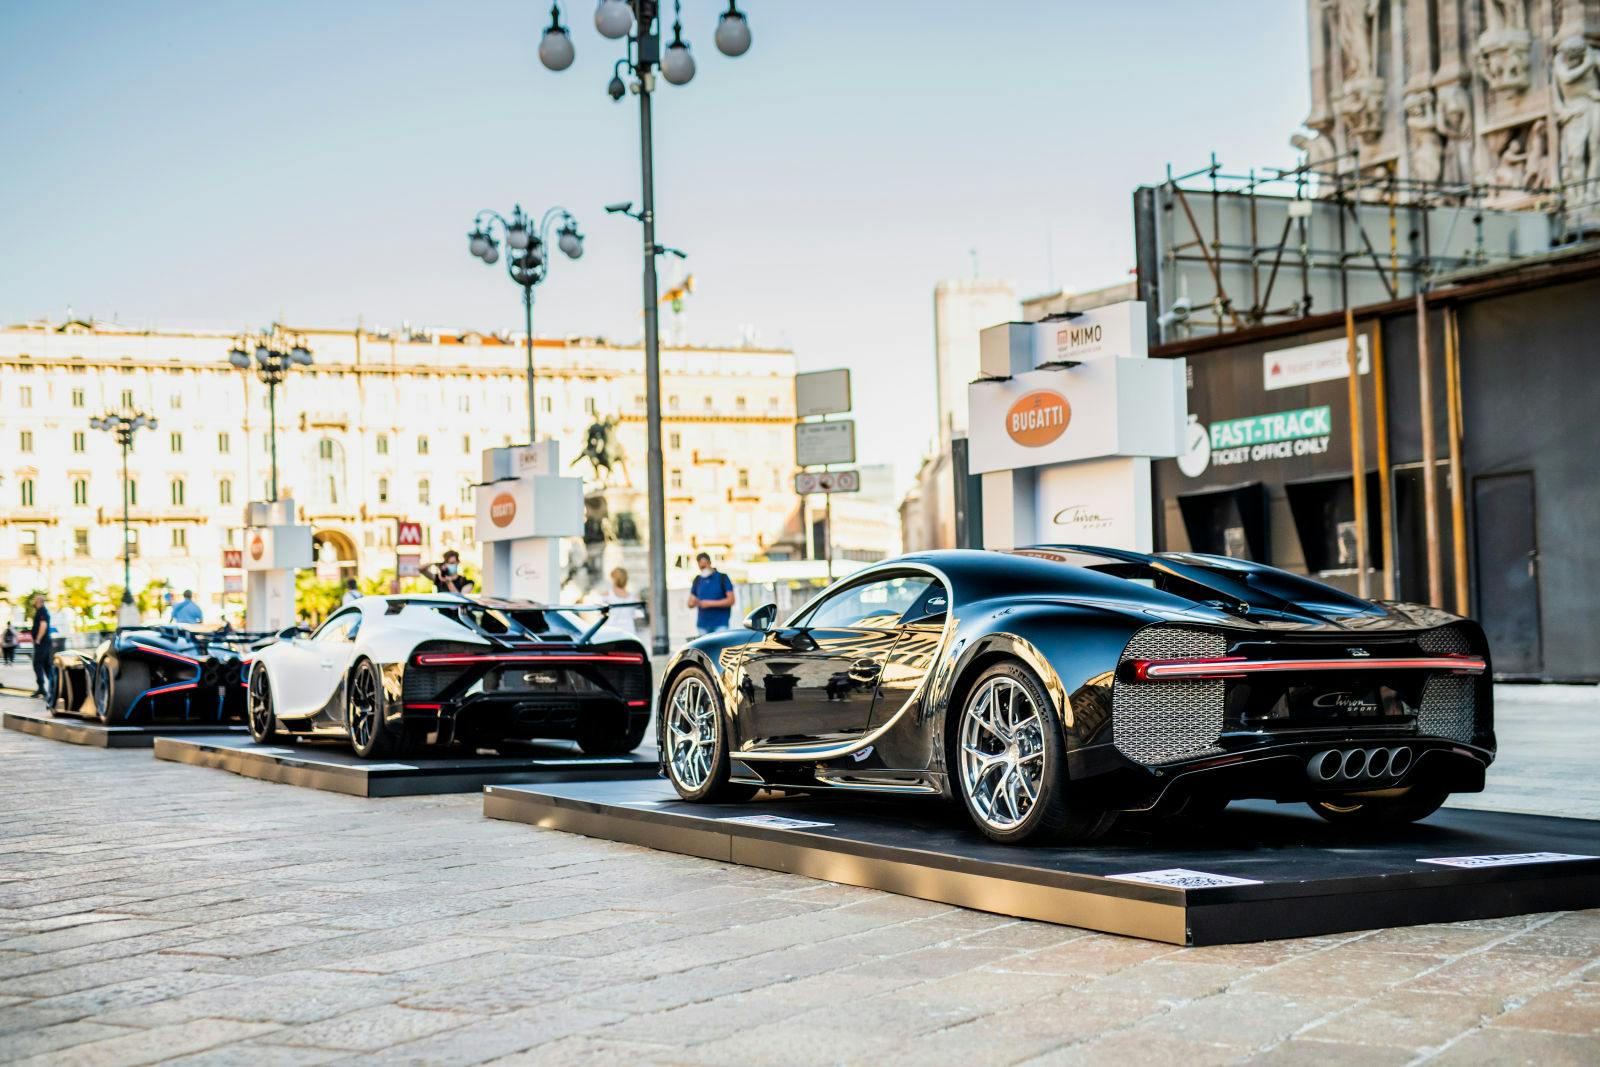 Bolide, Chiron Super Sport and Chiron Sport @ MiMo